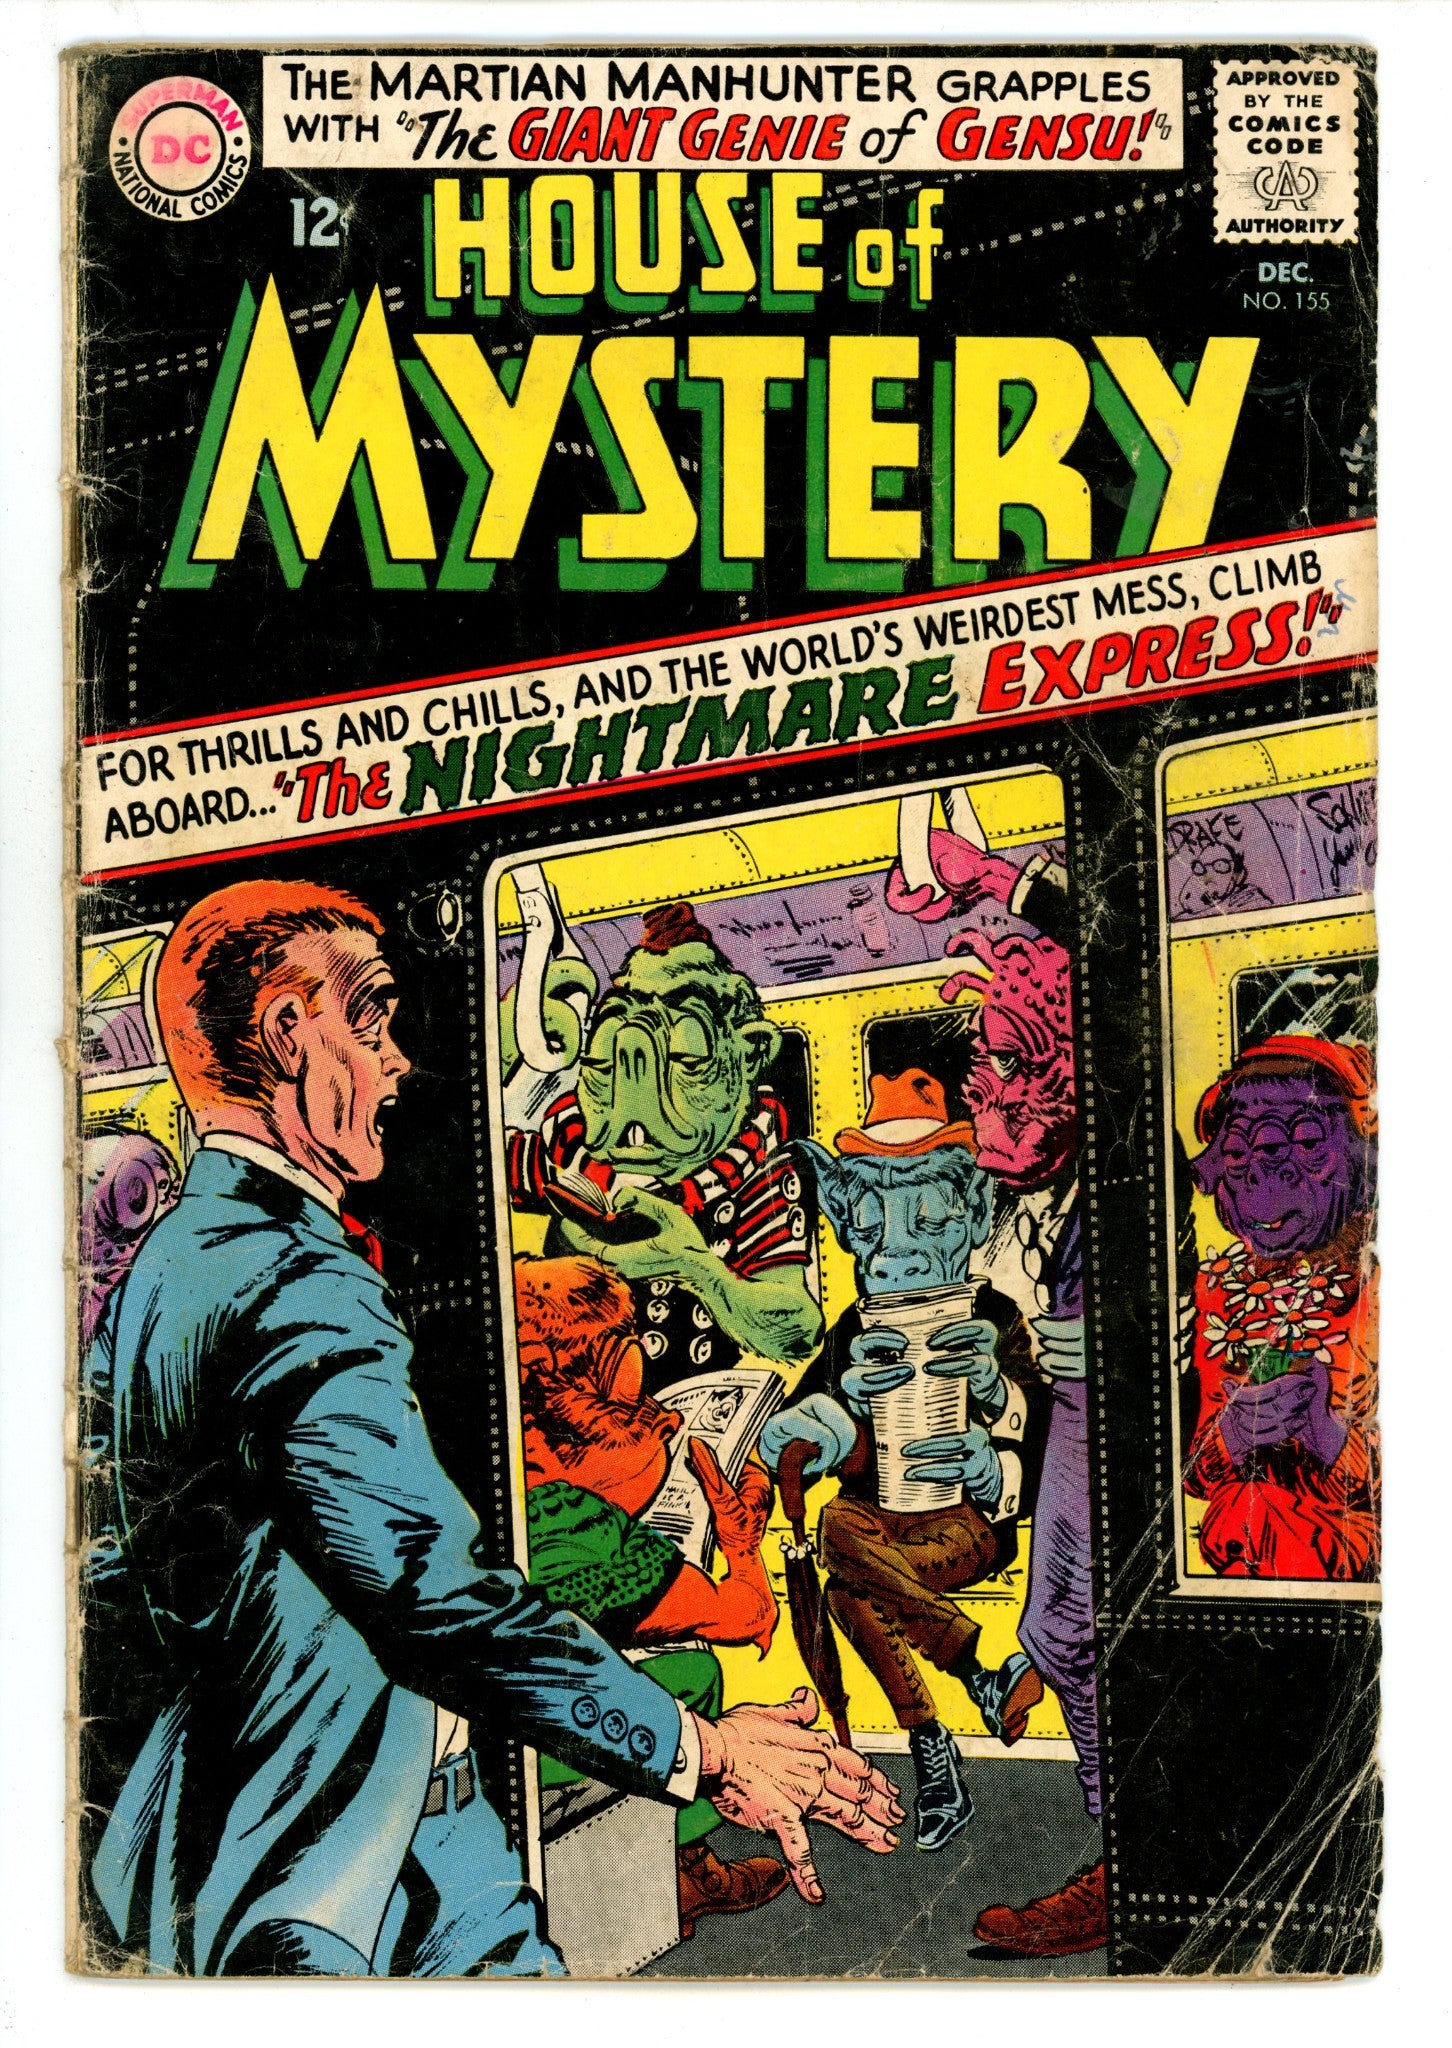 House of Mystery Vol 1 155 GD/VG (3.0) (1965) 